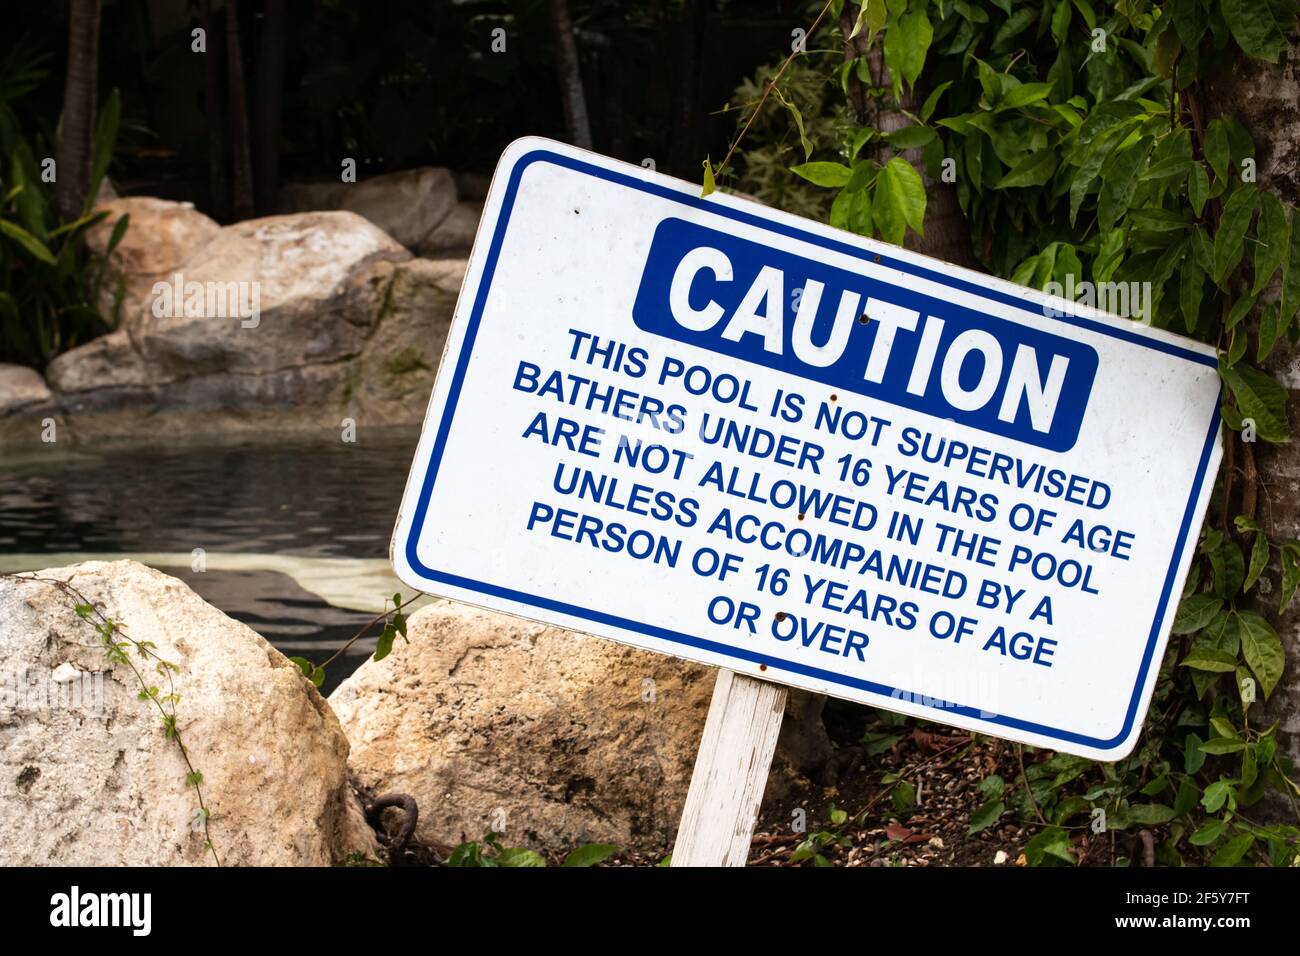 Caution sign that warns hotel patrons that the pool is not supervised, bathers 16 or younger shouldn't enter the pool without an adult's supervision. Stock Photo